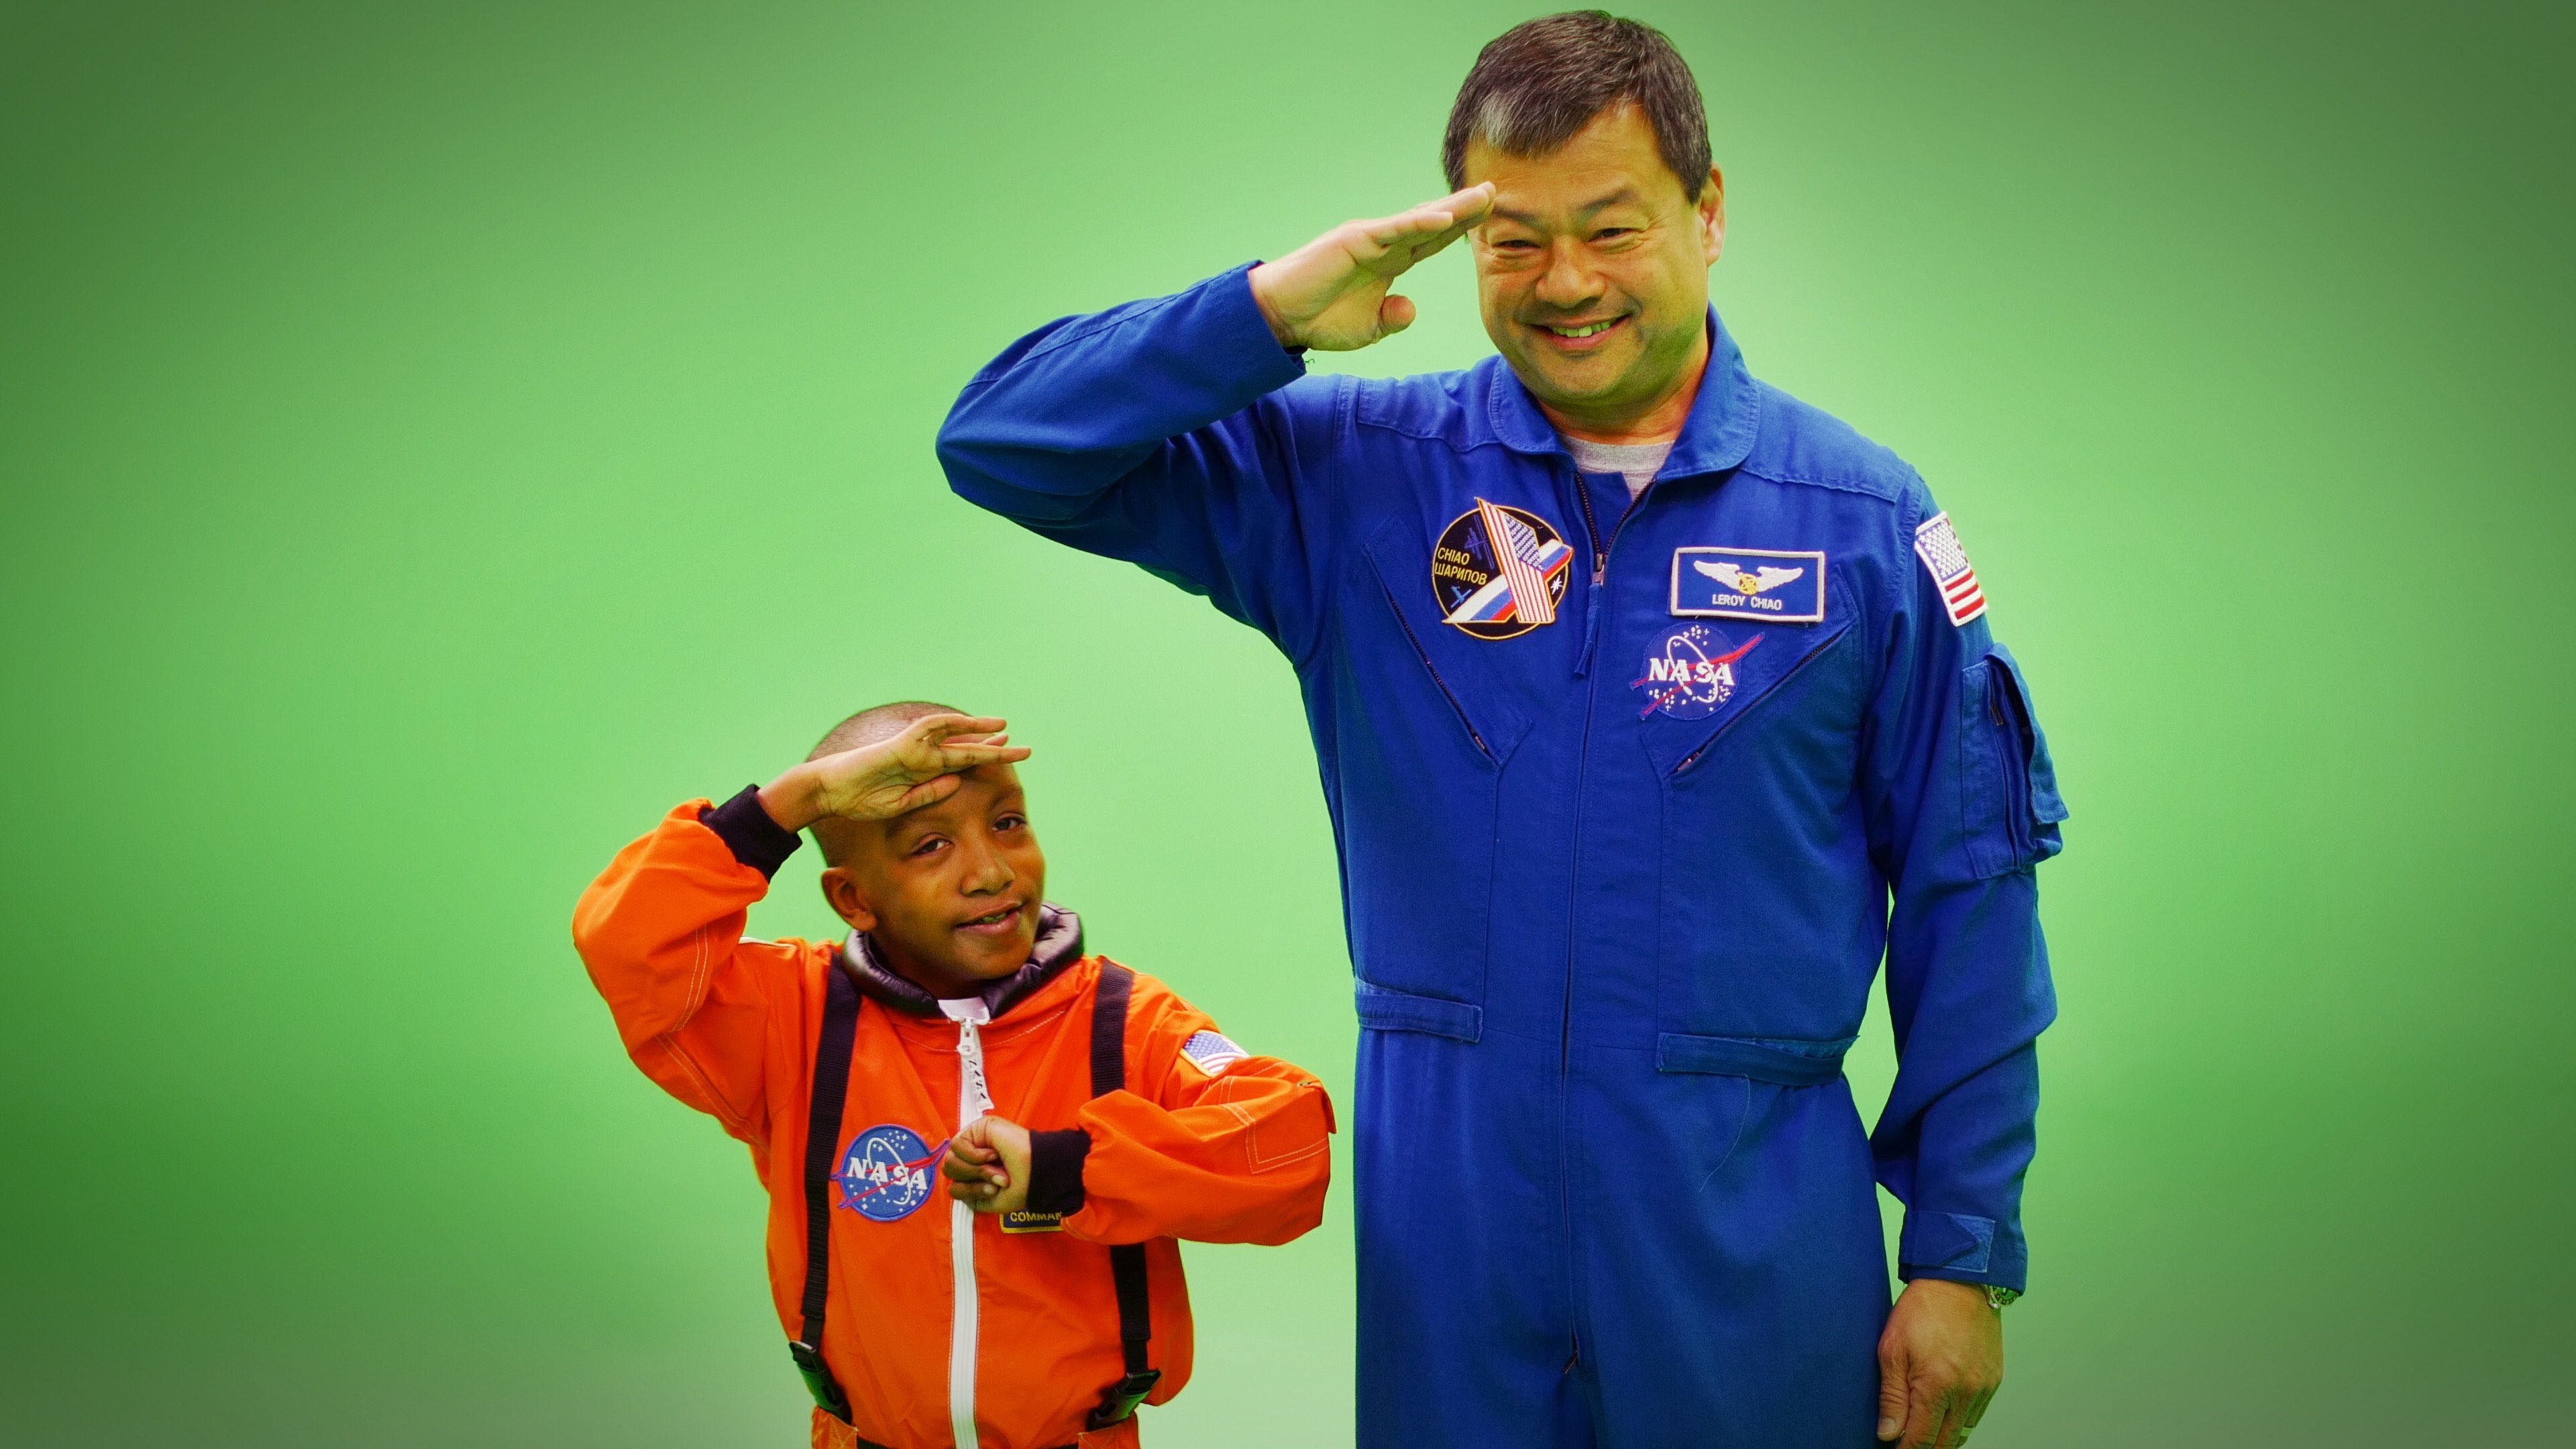 Zayden Wright and Commander LeRoy Chiao